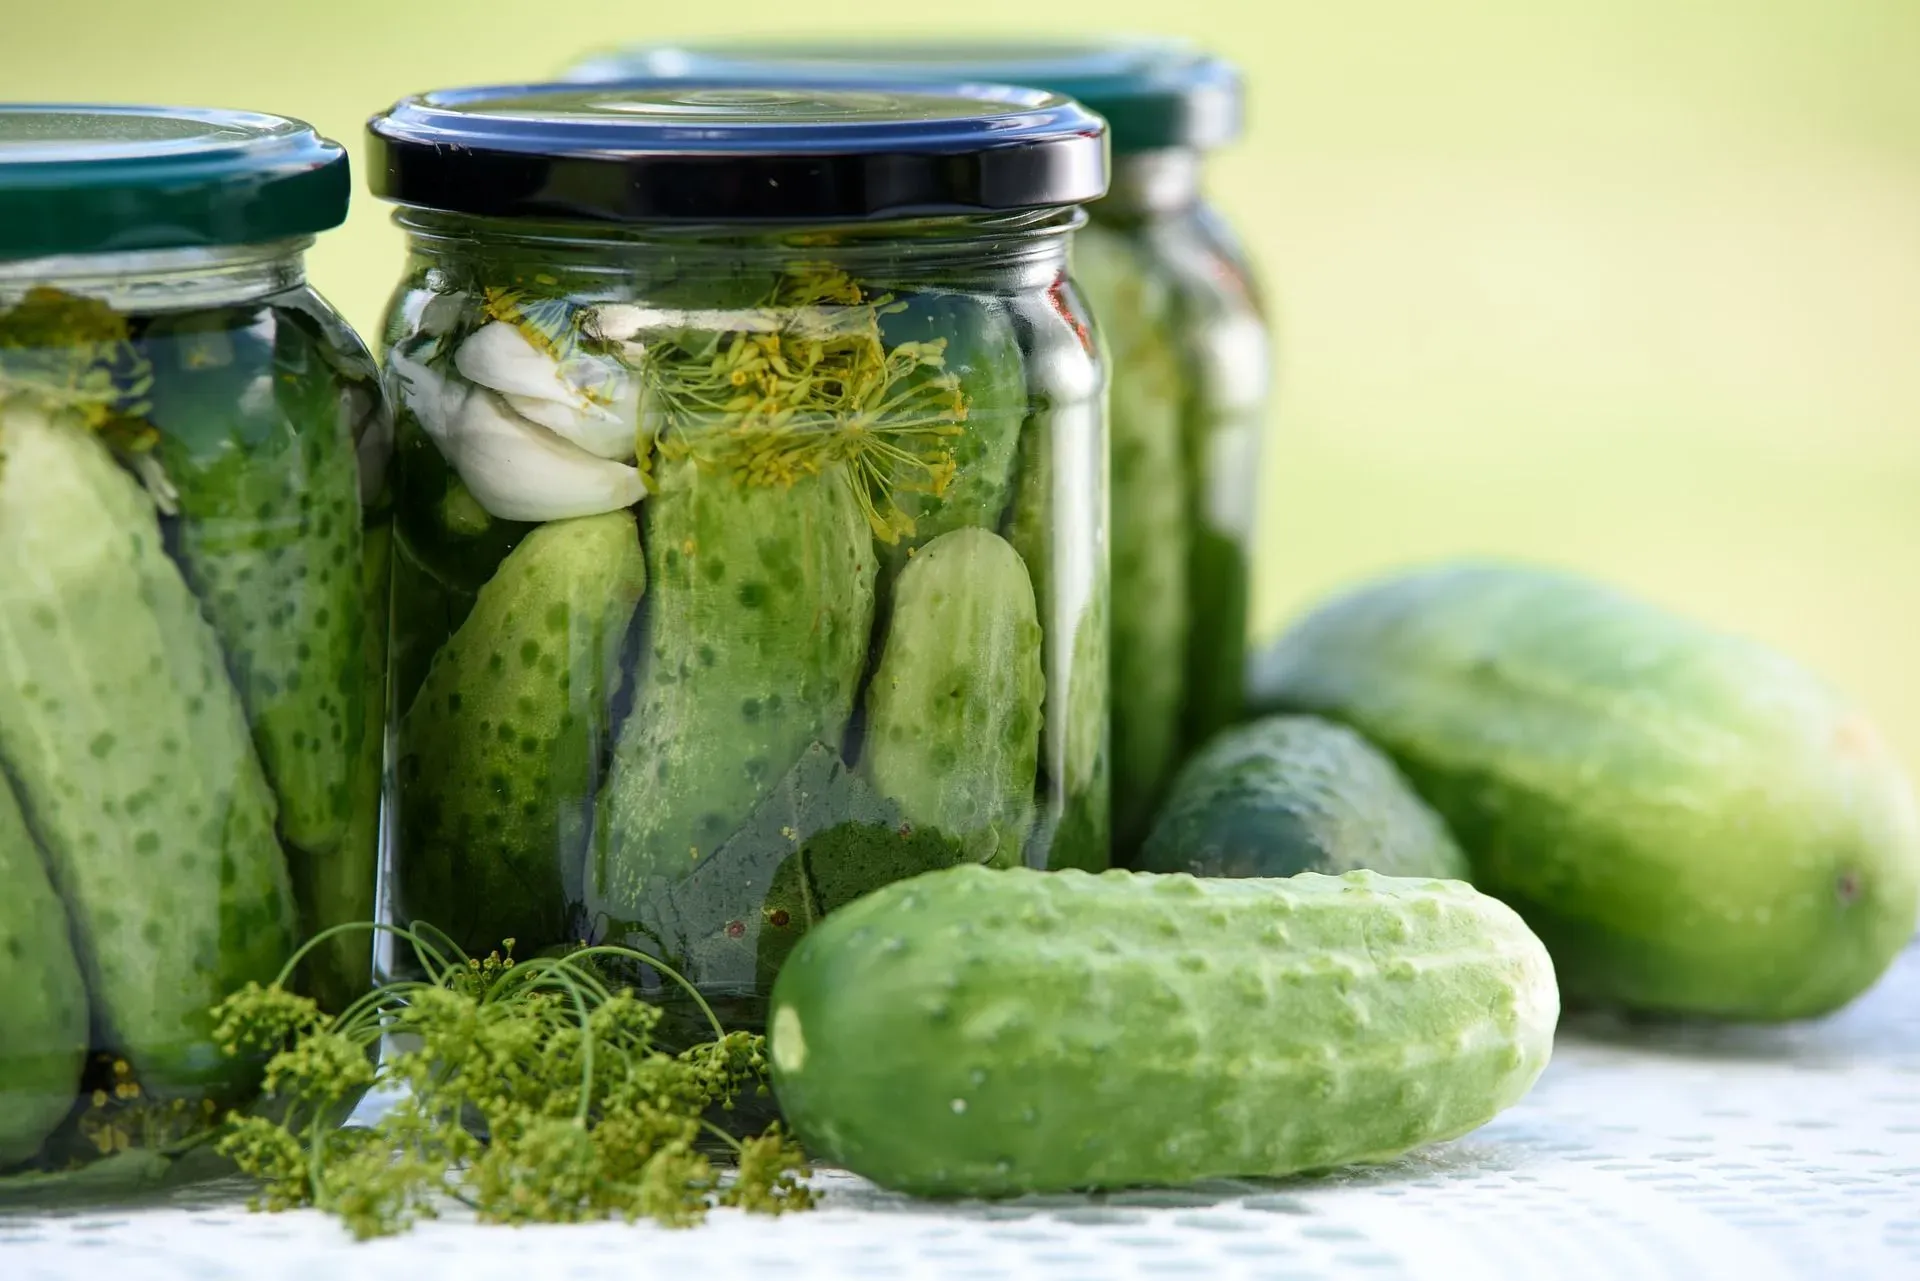 Find out interesting facts that answer the question; where do pickles come from?